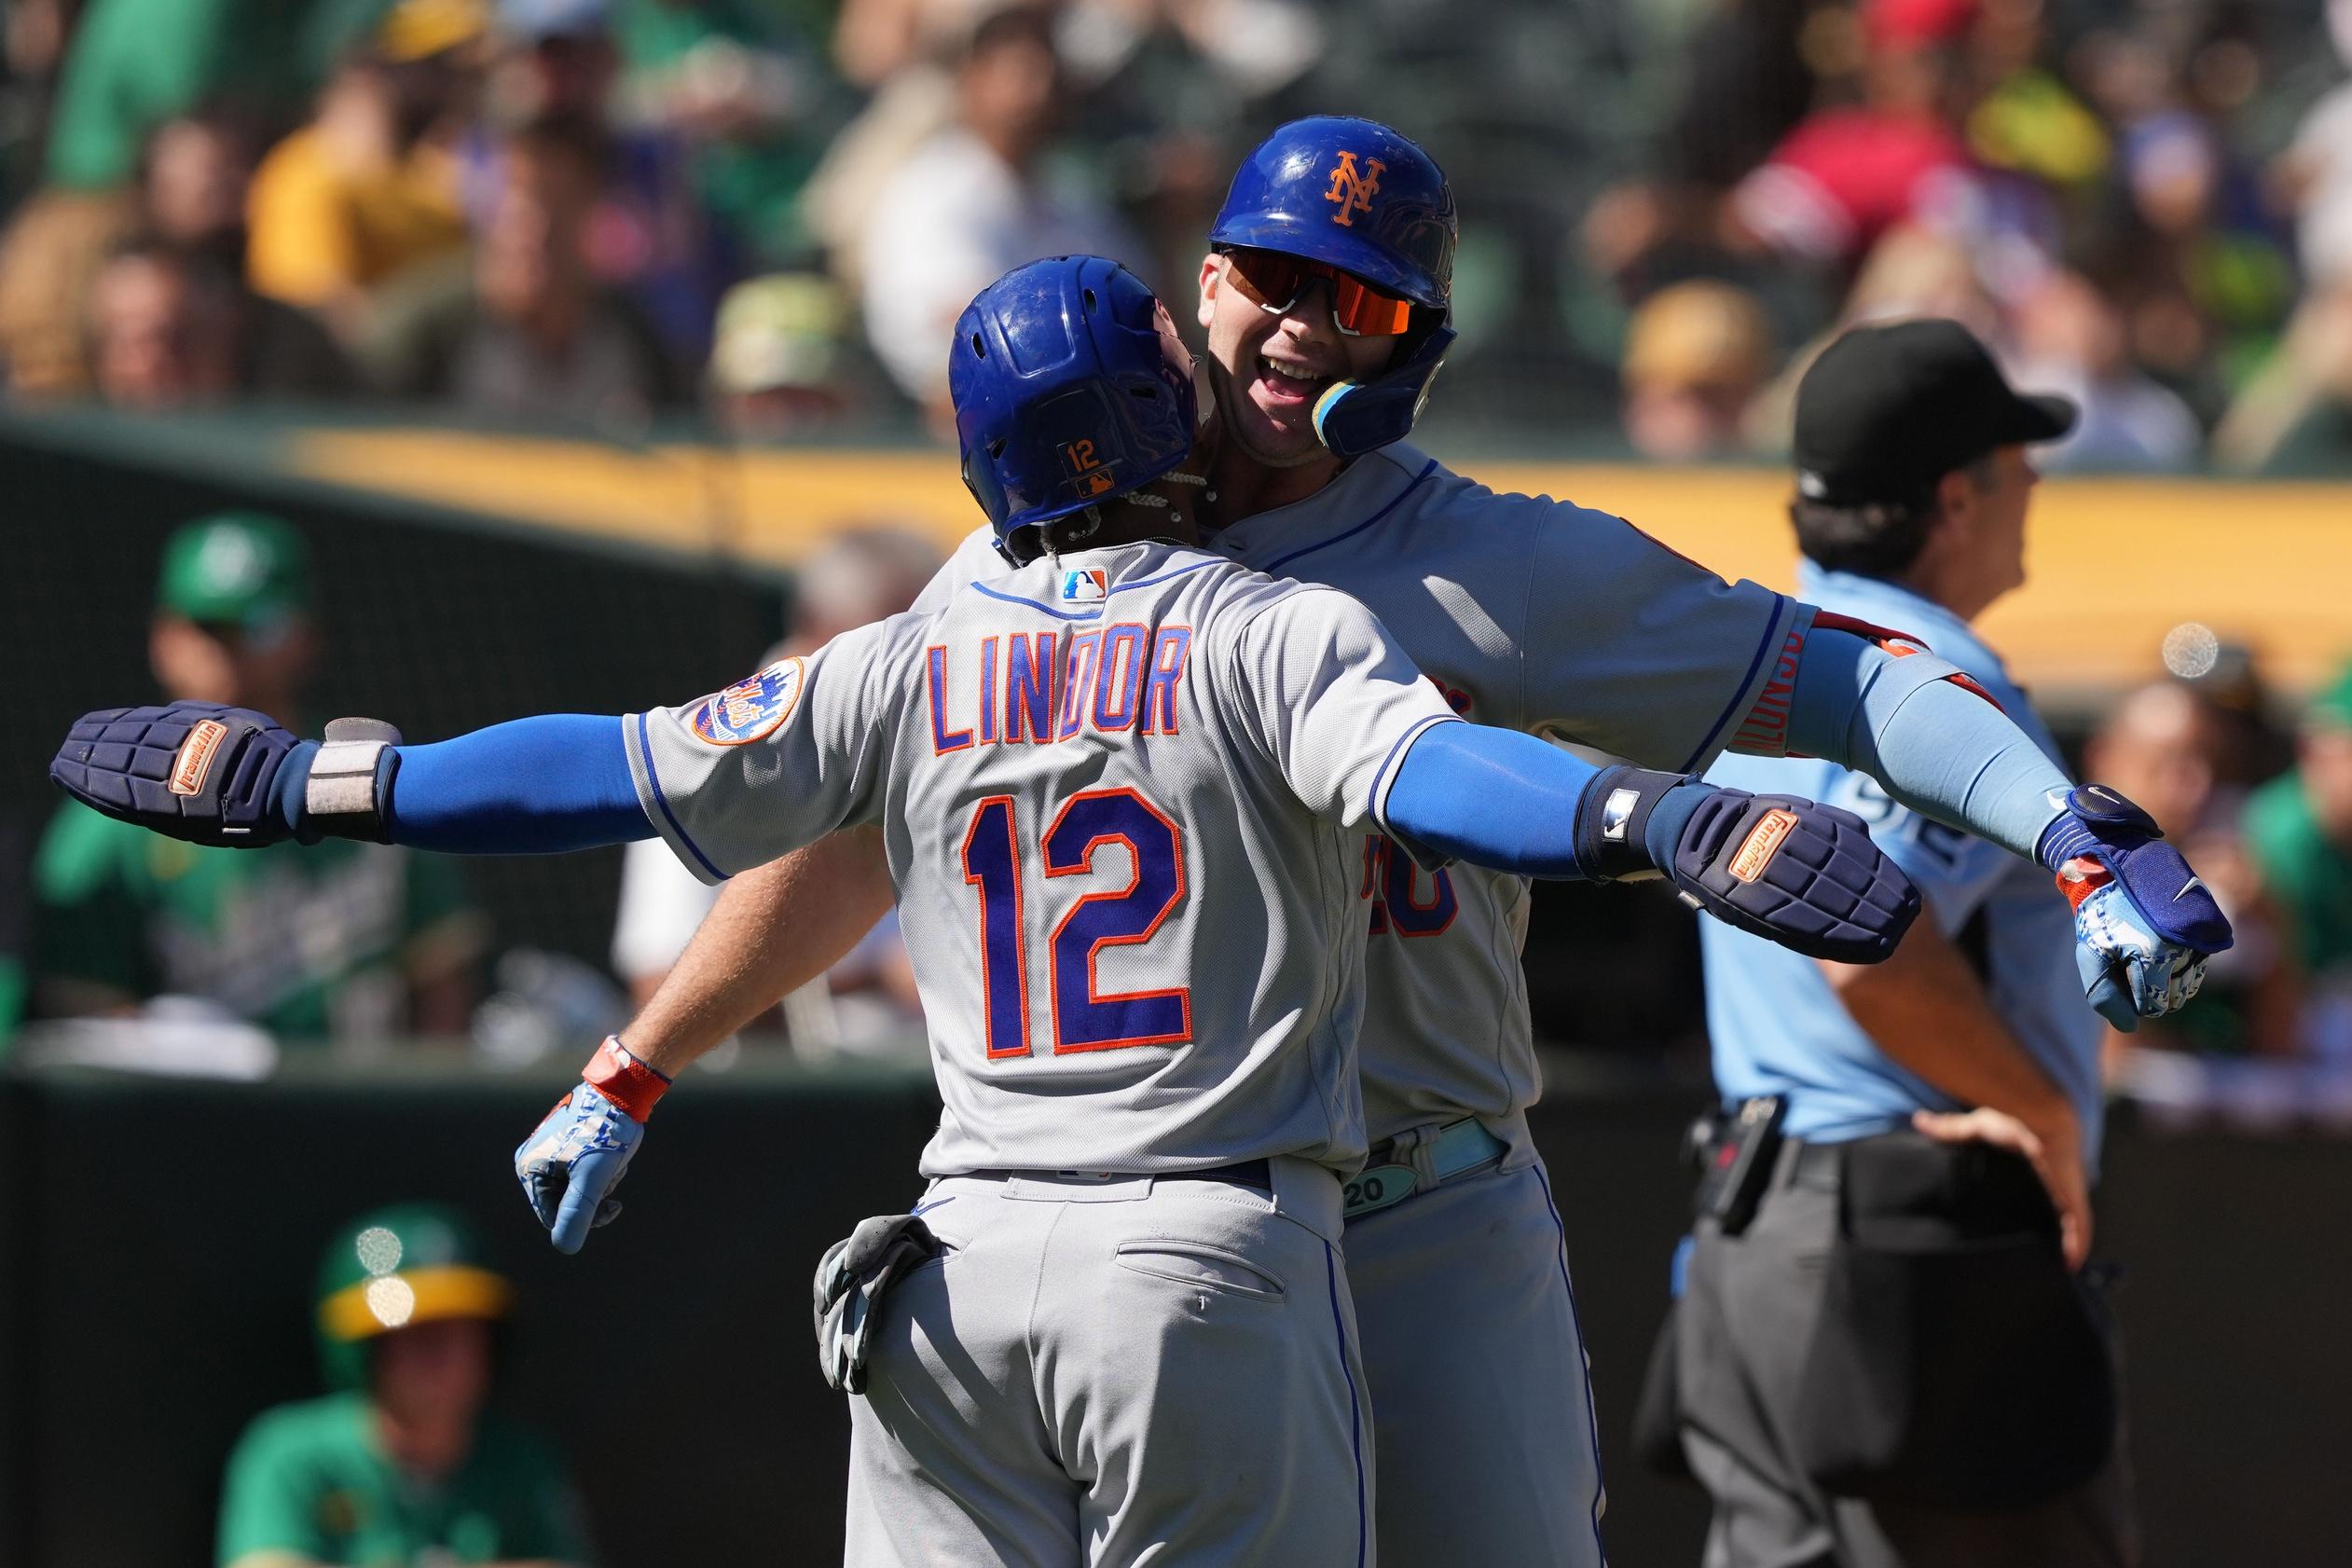 New York Mets designated hitter Pete Alonso (right) celebrates with shortstop Francisco Lindor (12) after hitting a home run against the Oakland Athletics during the fourth inning at RingCentral Coliseum. / Darren Yamashita-USA TODAY Sports